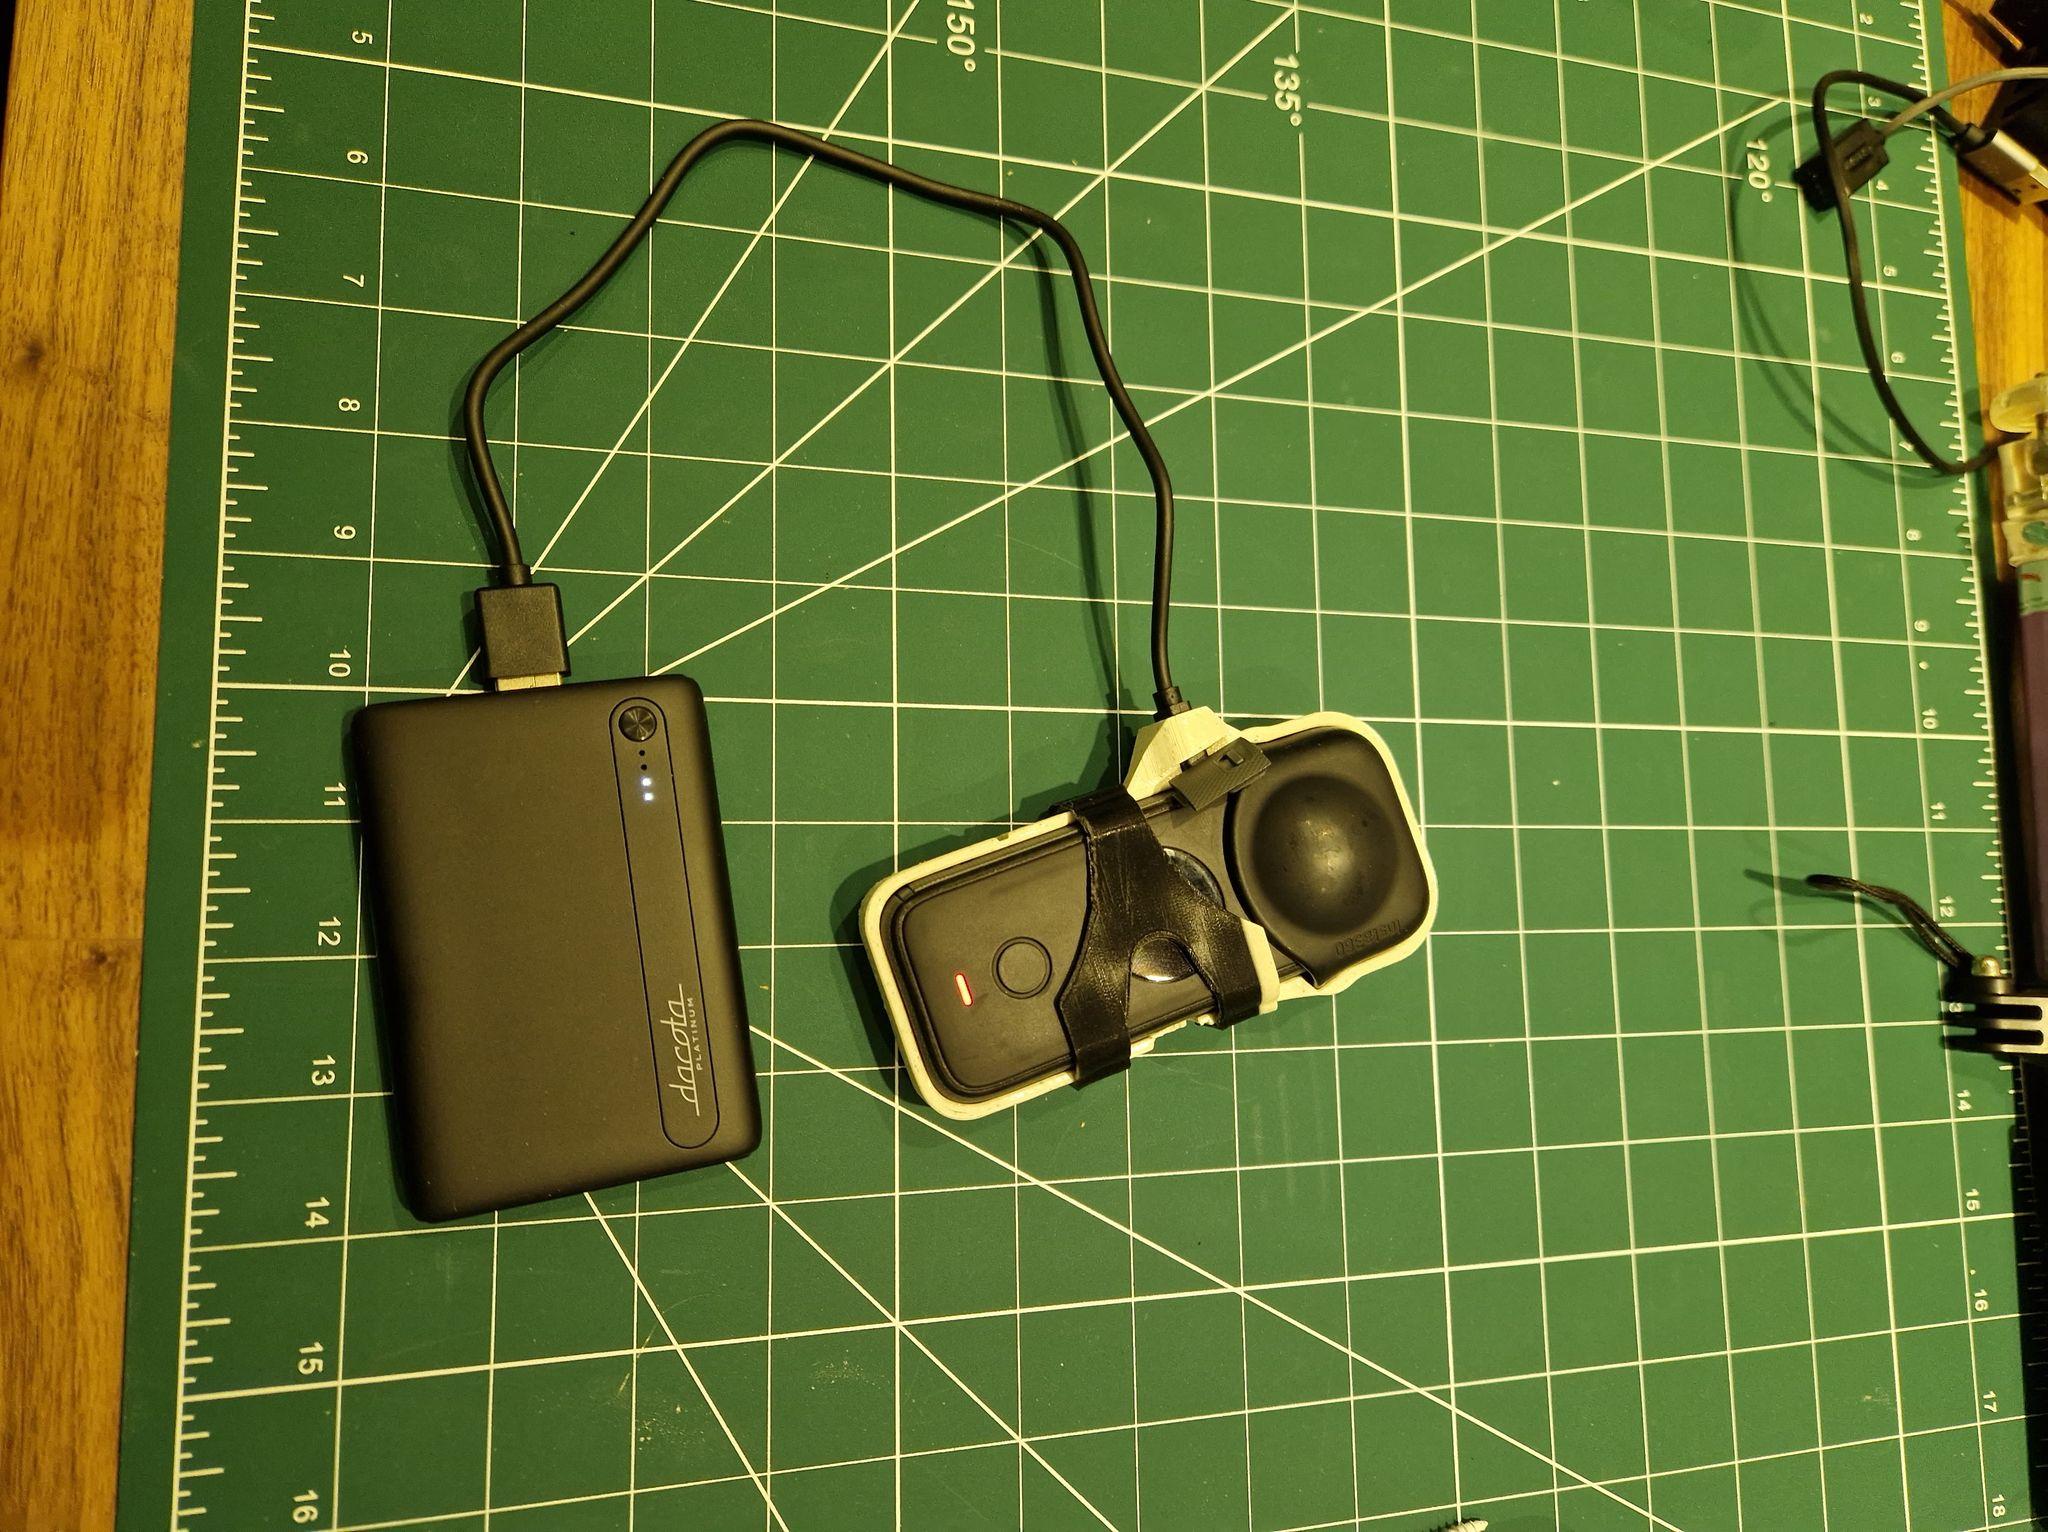 insta 360 one x2 charge guard body.stl 3d model